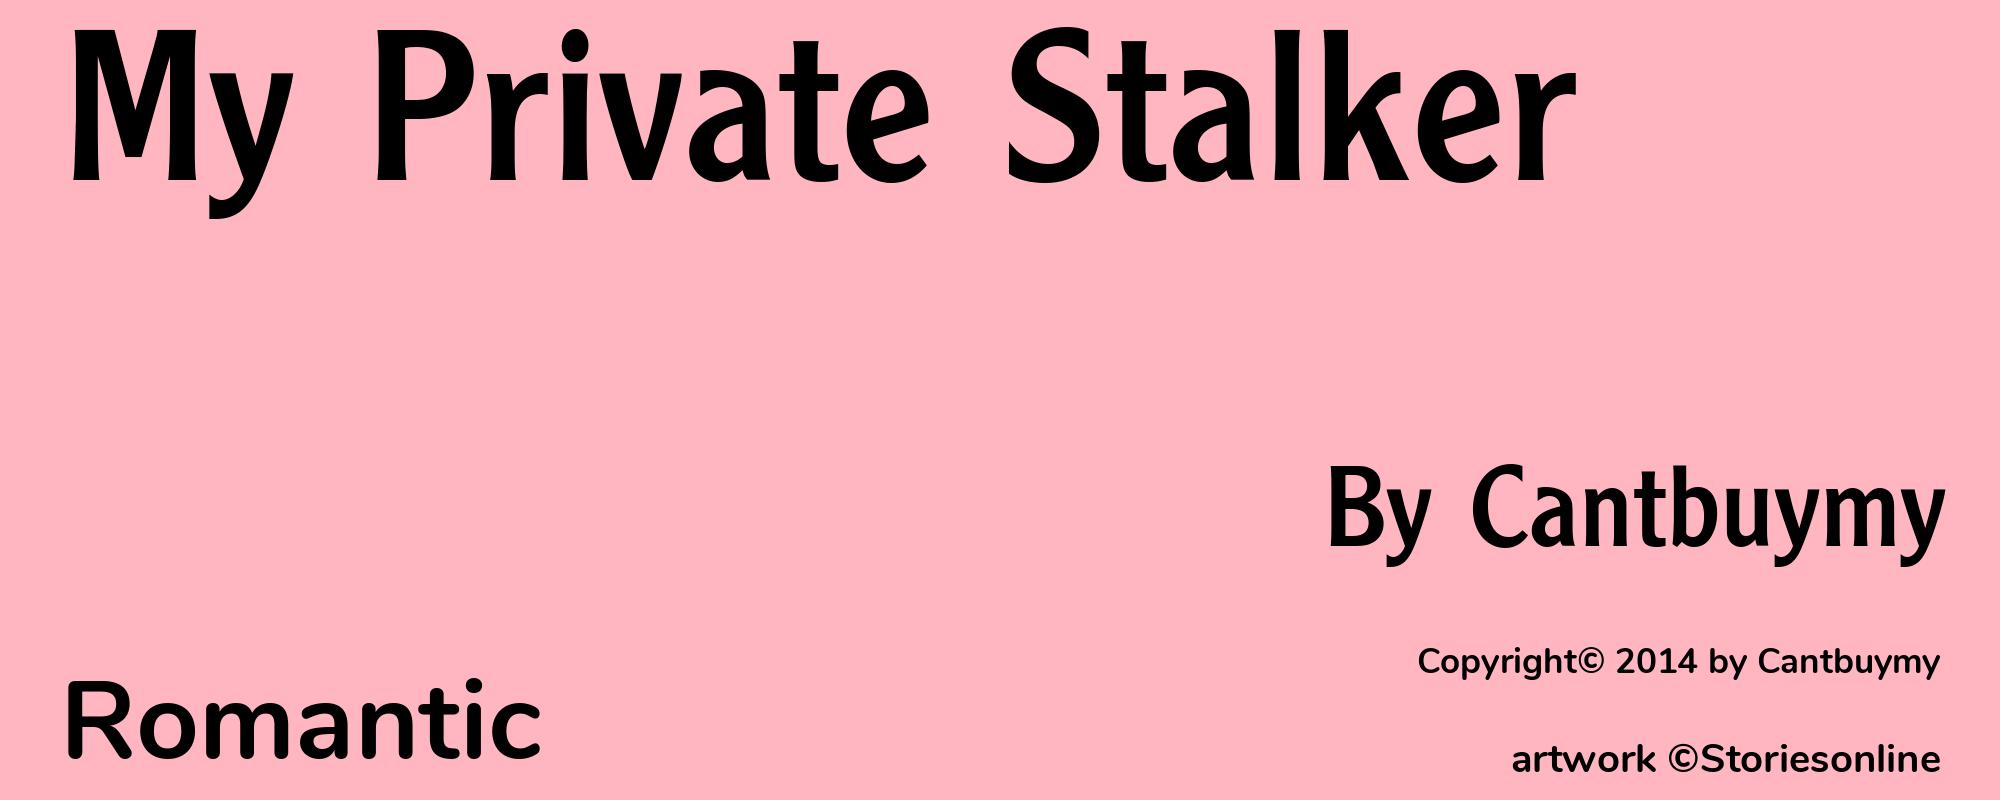 My Private Stalker - Cover